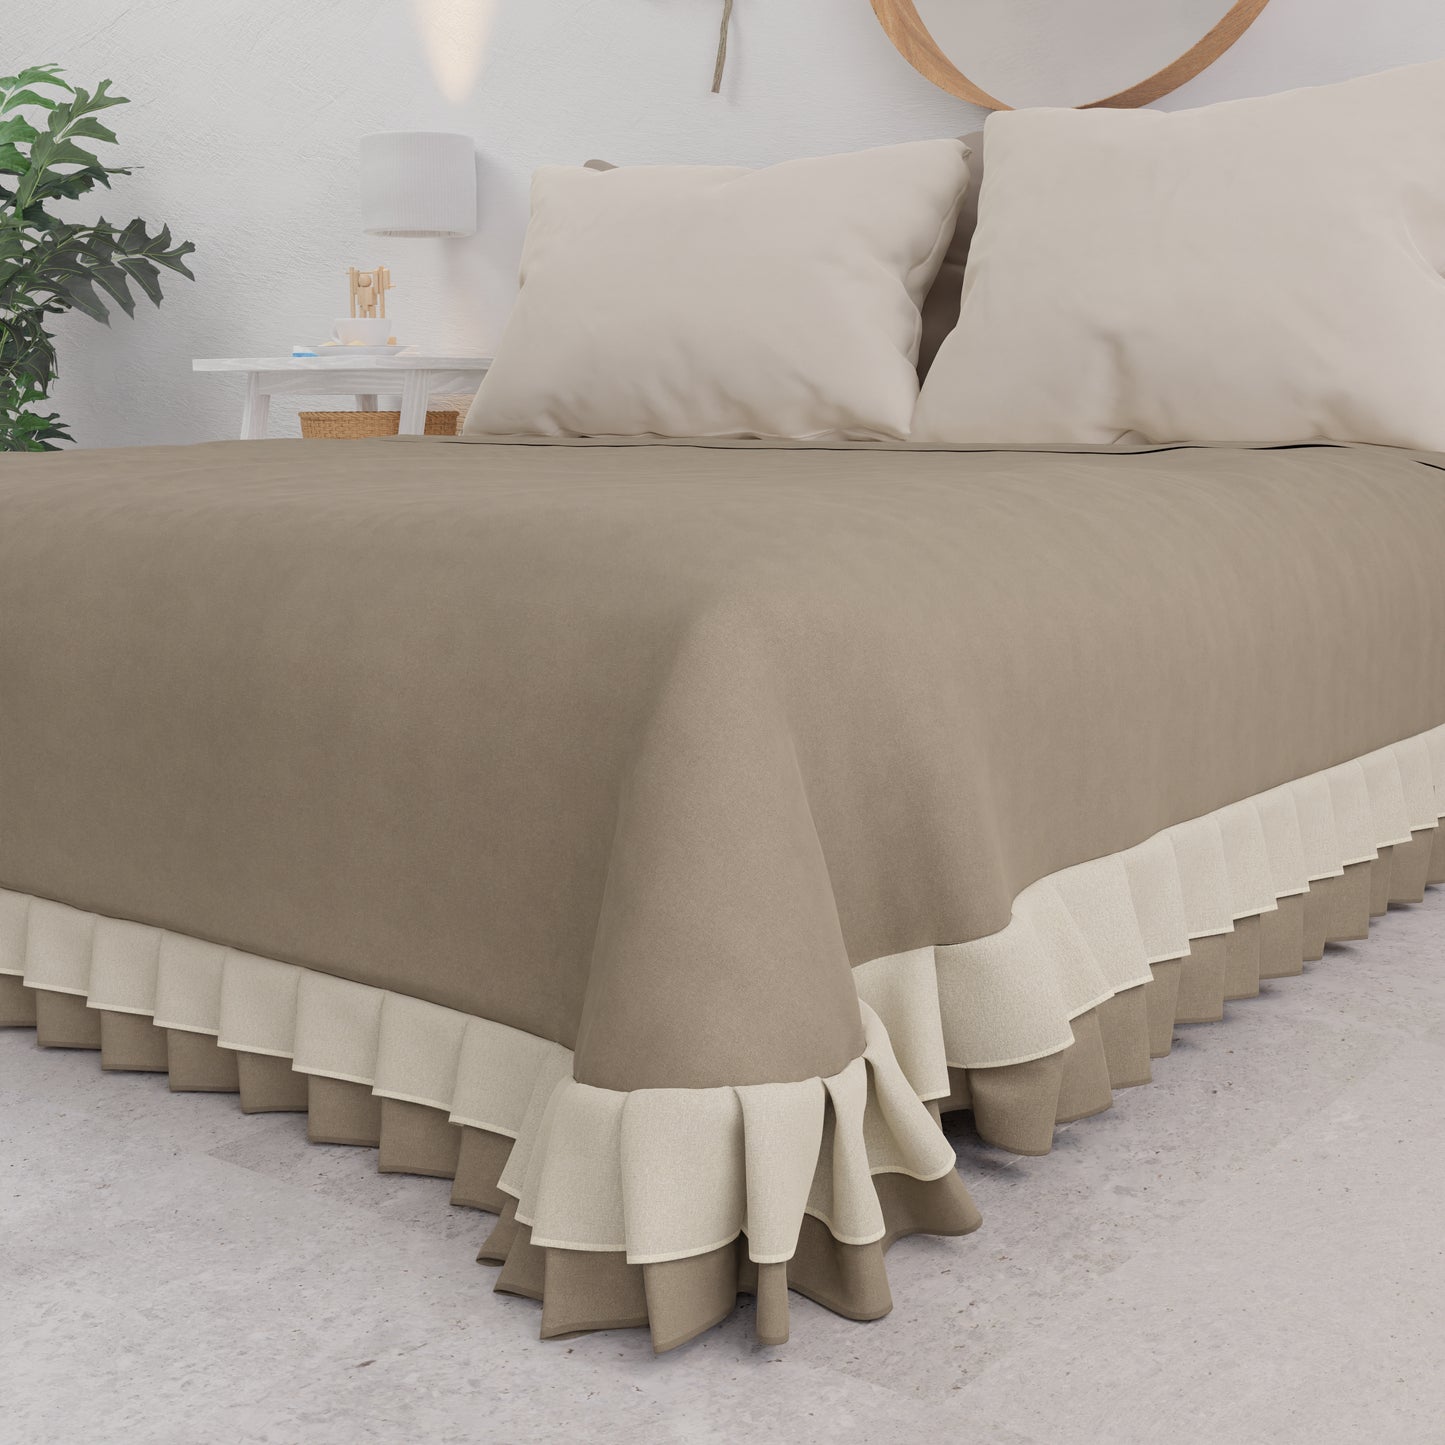 Summer Double Bedspread, Bedspread with Double Ruffles, Taupe 